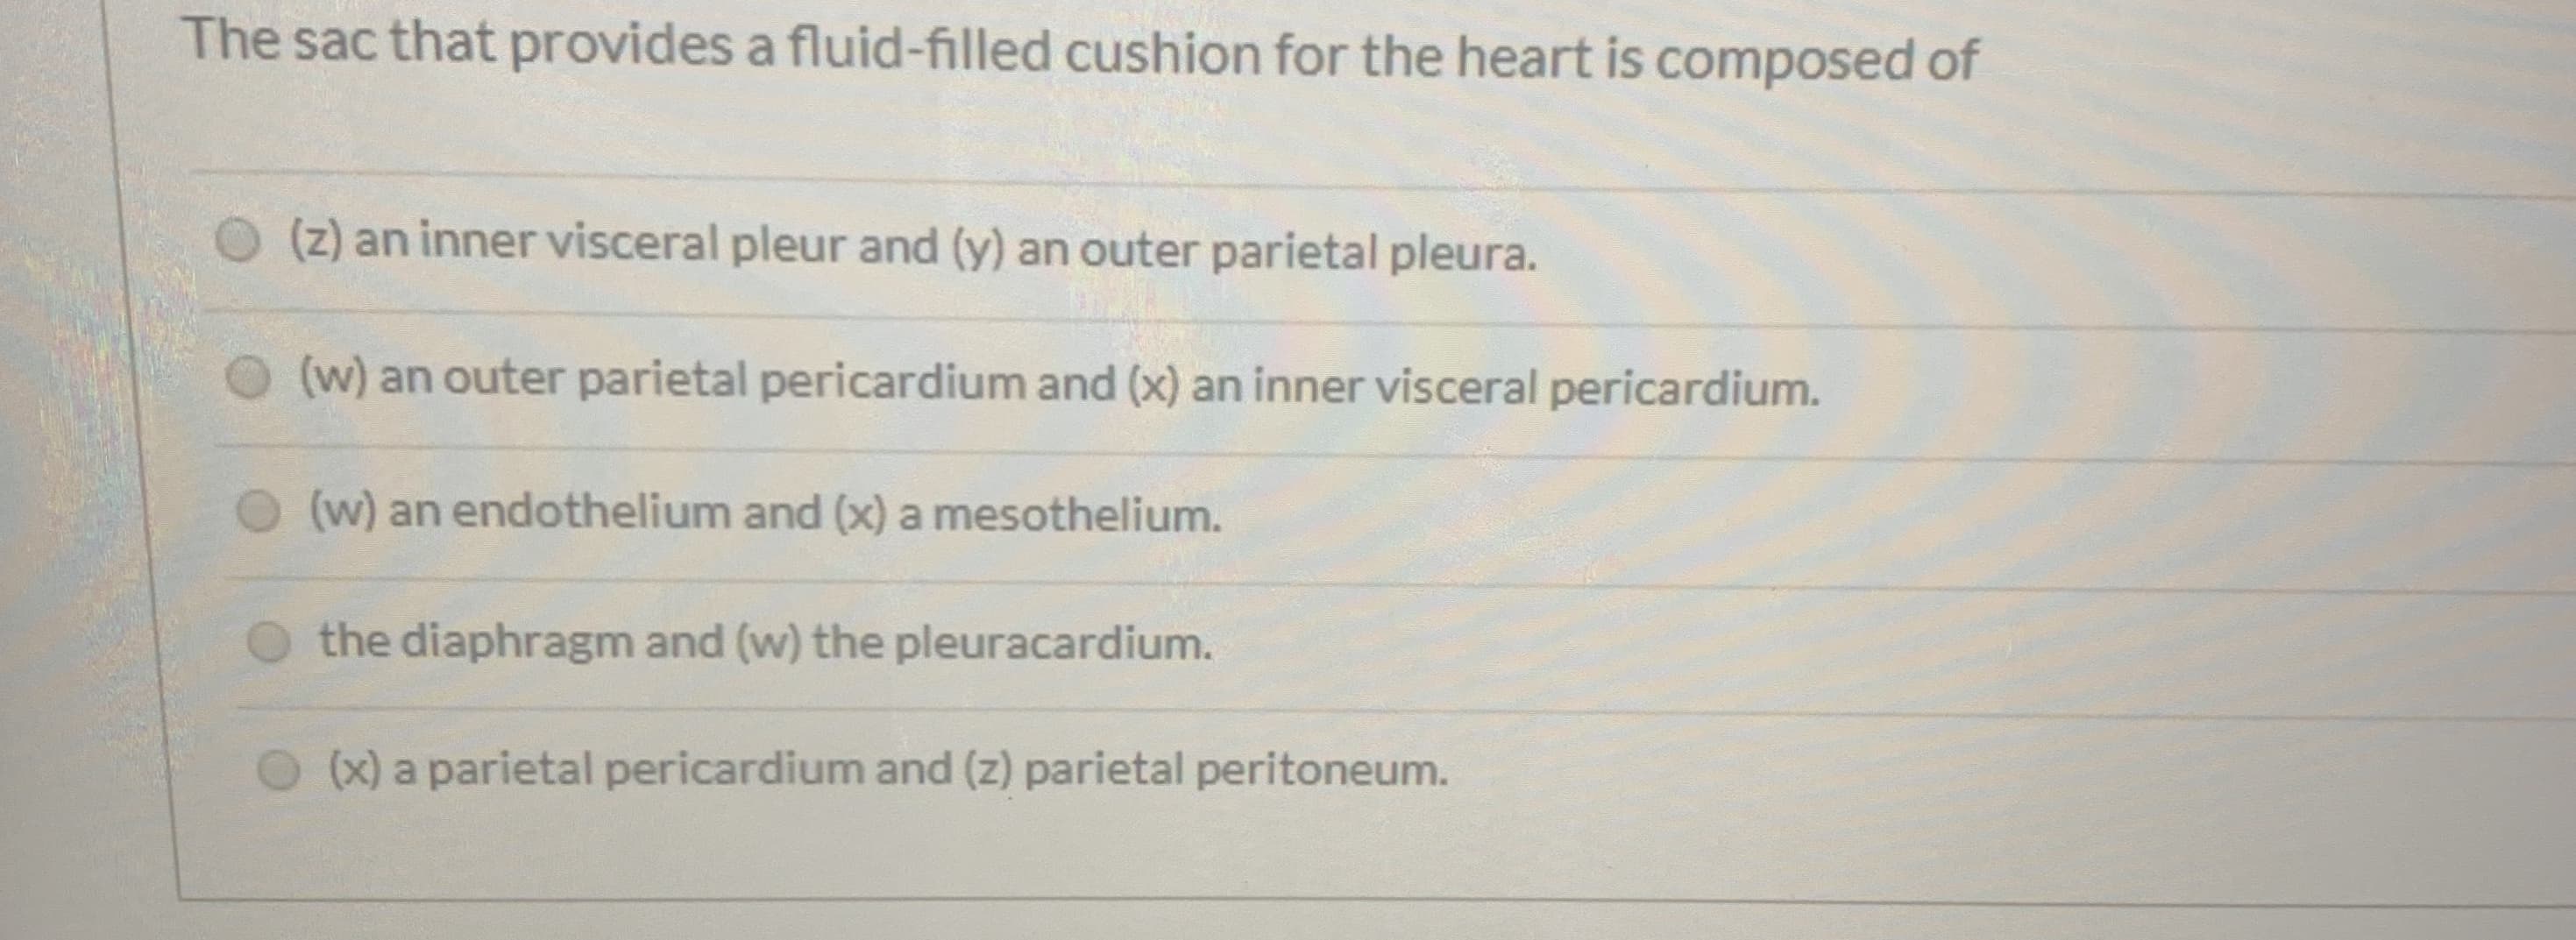 The sac that provides a fluid-filled cushion for the heart is composed of
(z) an inner visceral pleur and (y) an outer parietal pleura.
(w) an outer parietal pericardium and (x) an inner visceral pericardium.
(w) an endothelium and (x) a mesothelium.
the diaphragm and (w) the pleuracardium.
(x) a parietal pericardium and (z) parietal peritoneum.
